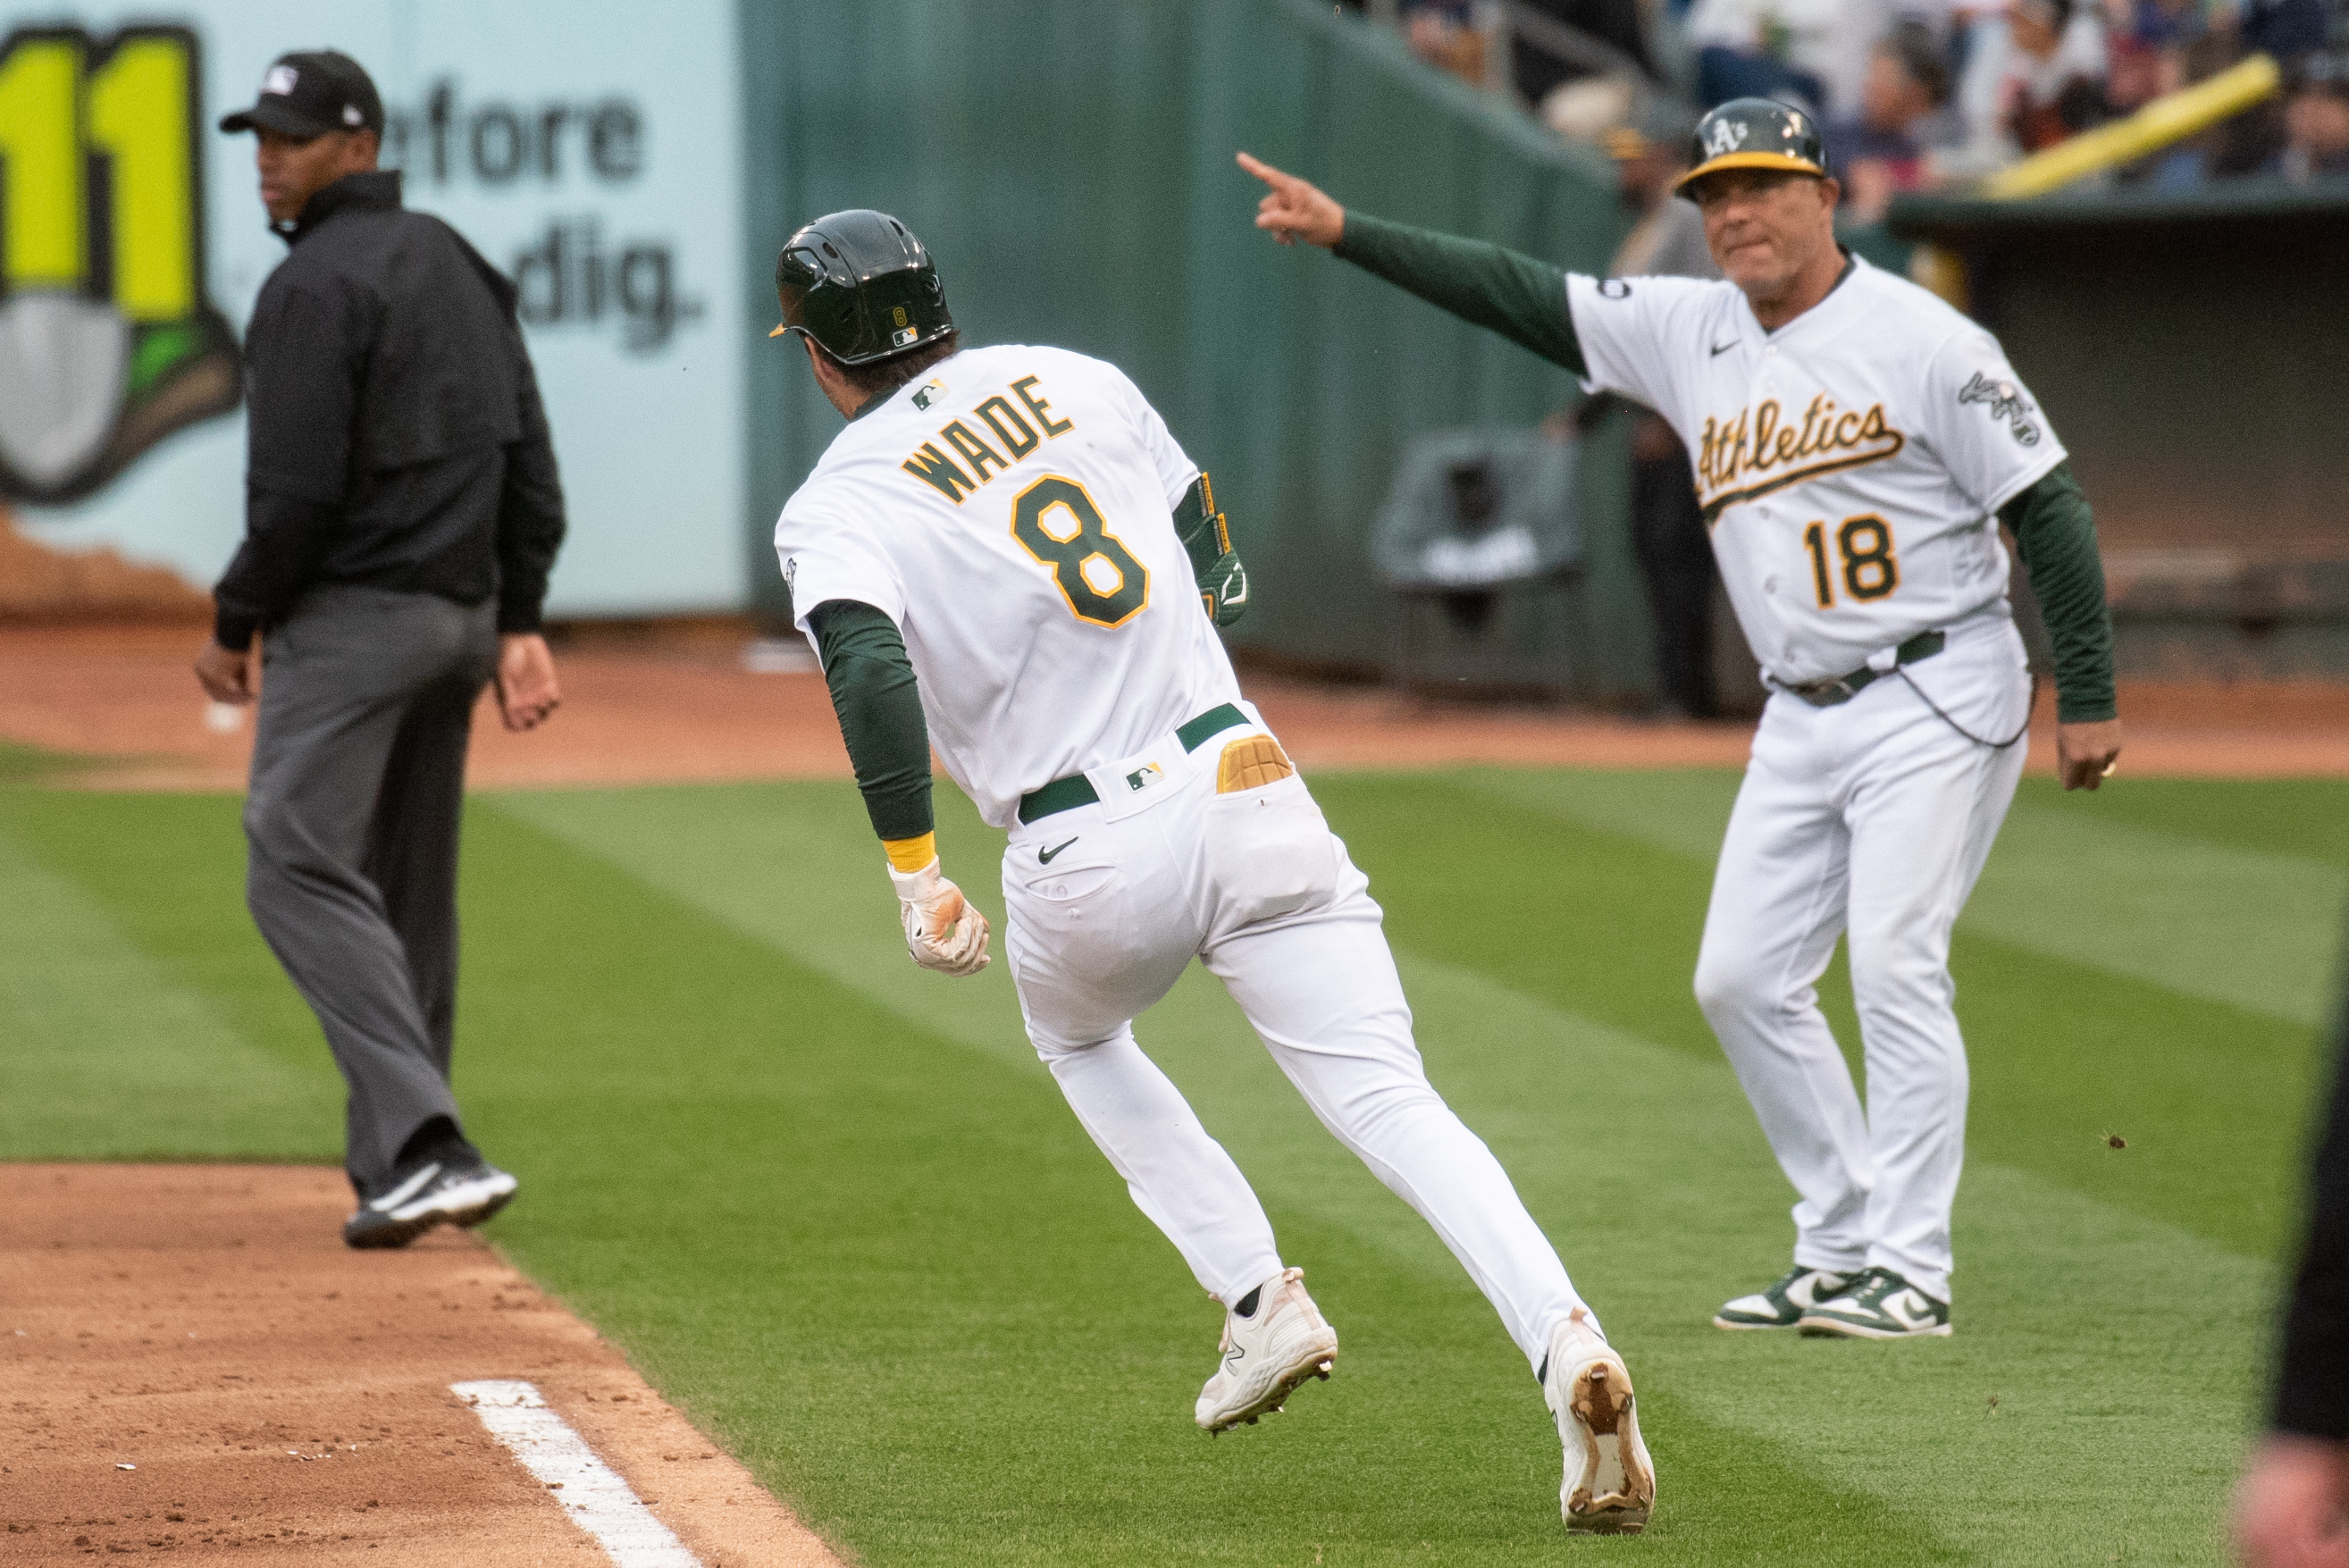 A's win over Yankees